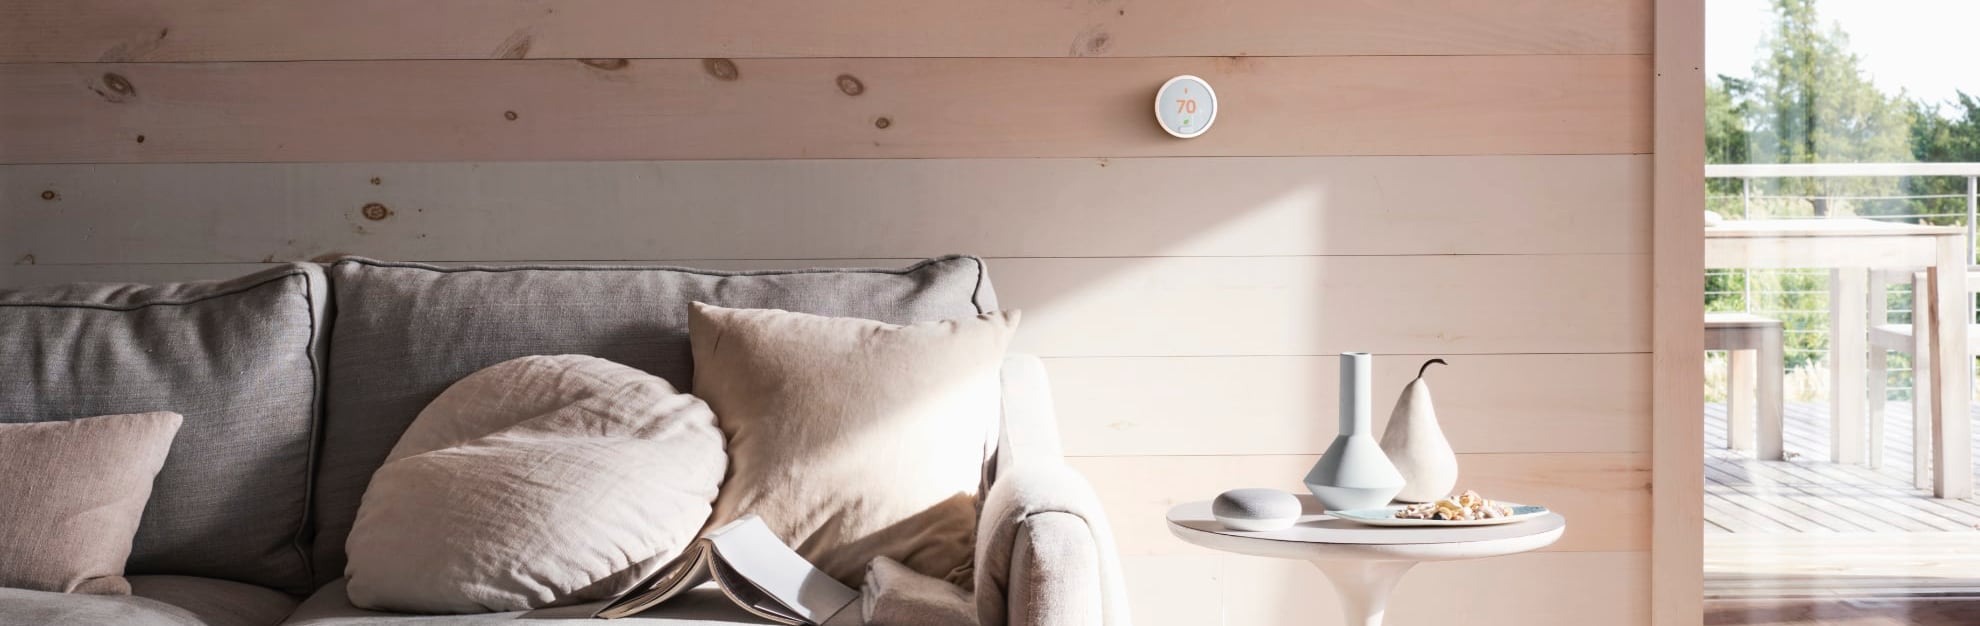 Vivint Home Automation in Olympia